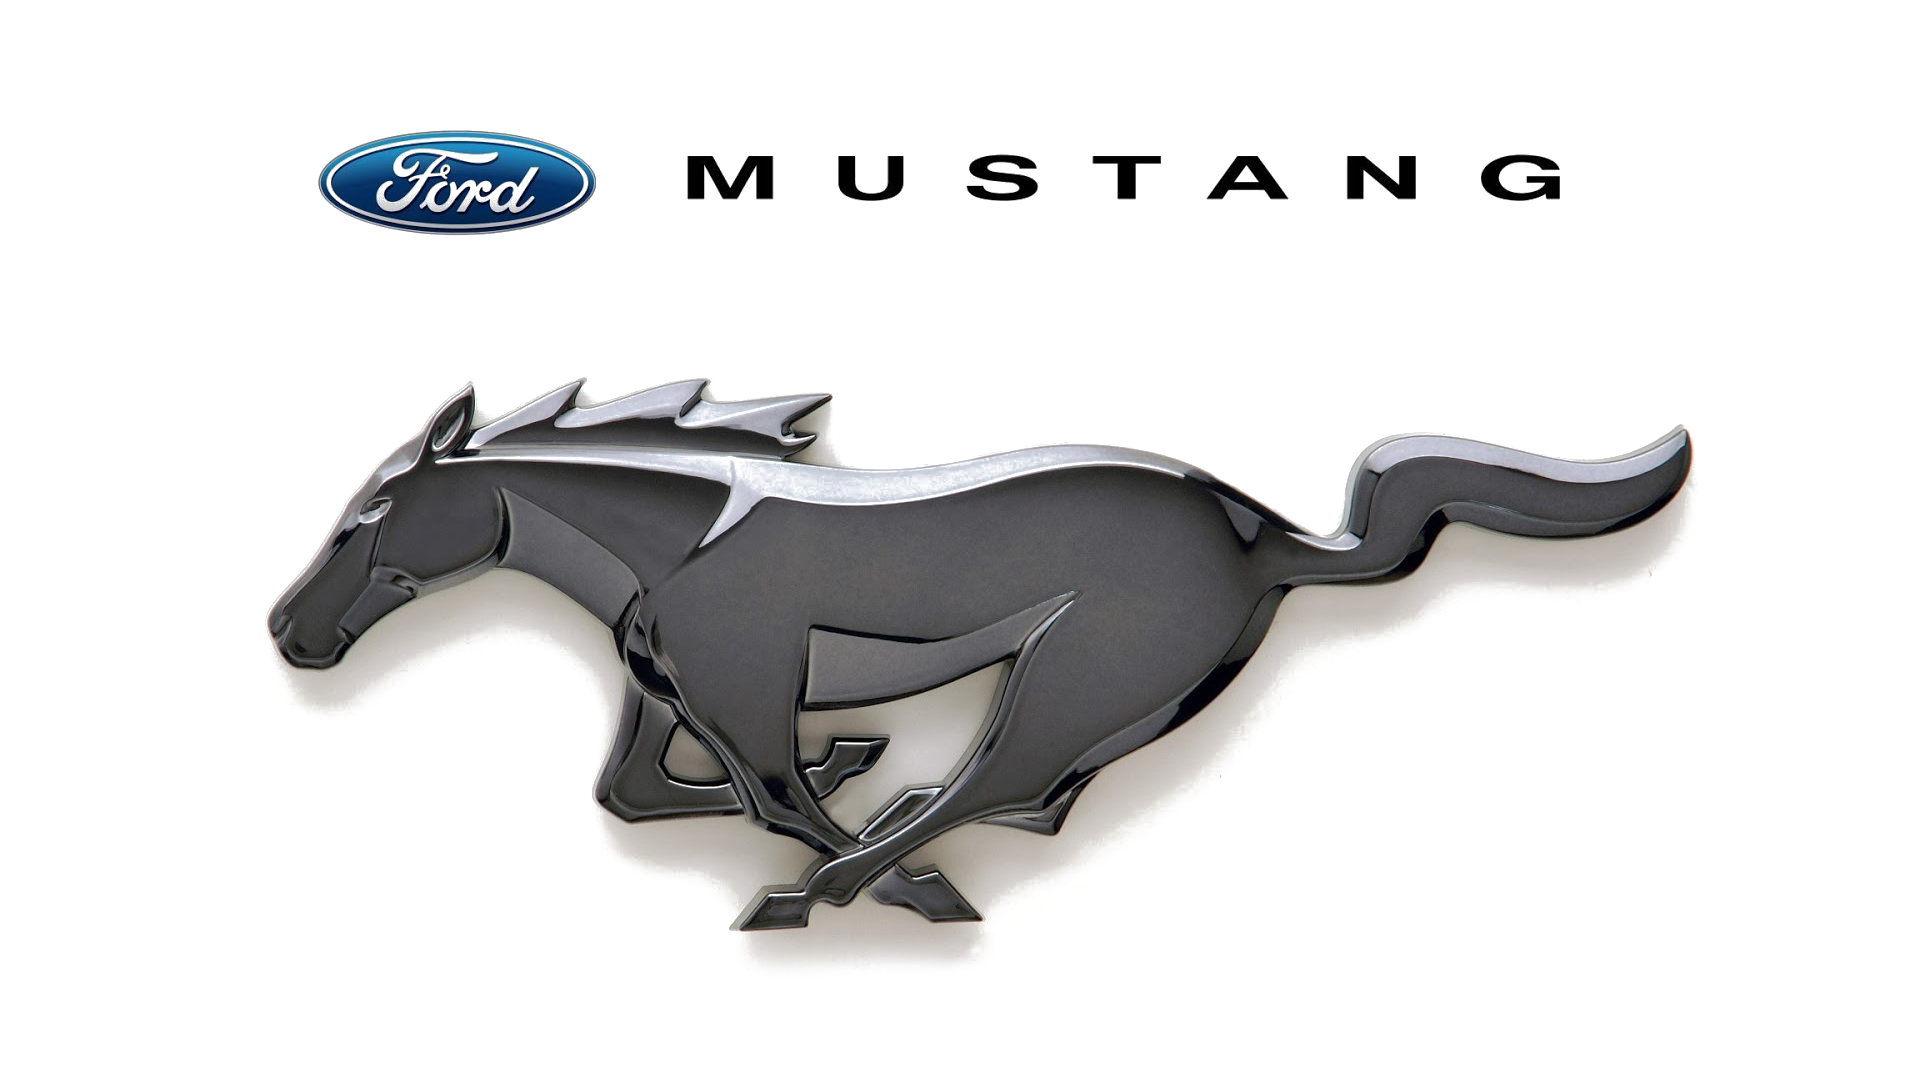 Ford Logo and Car Symbol Meaning